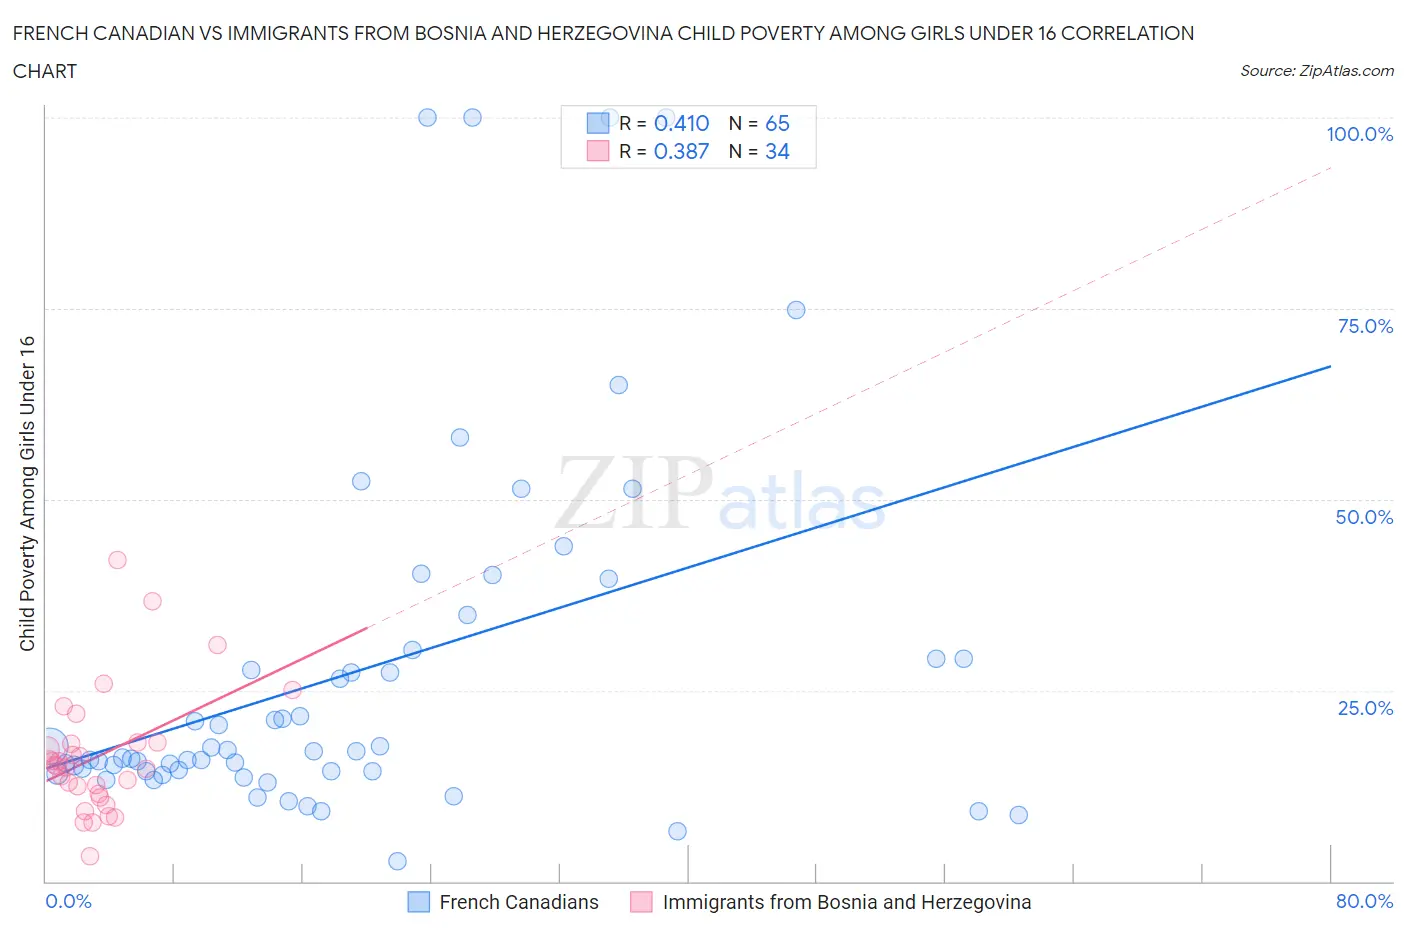 French Canadian vs Immigrants from Bosnia and Herzegovina Child Poverty Among Girls Under 16